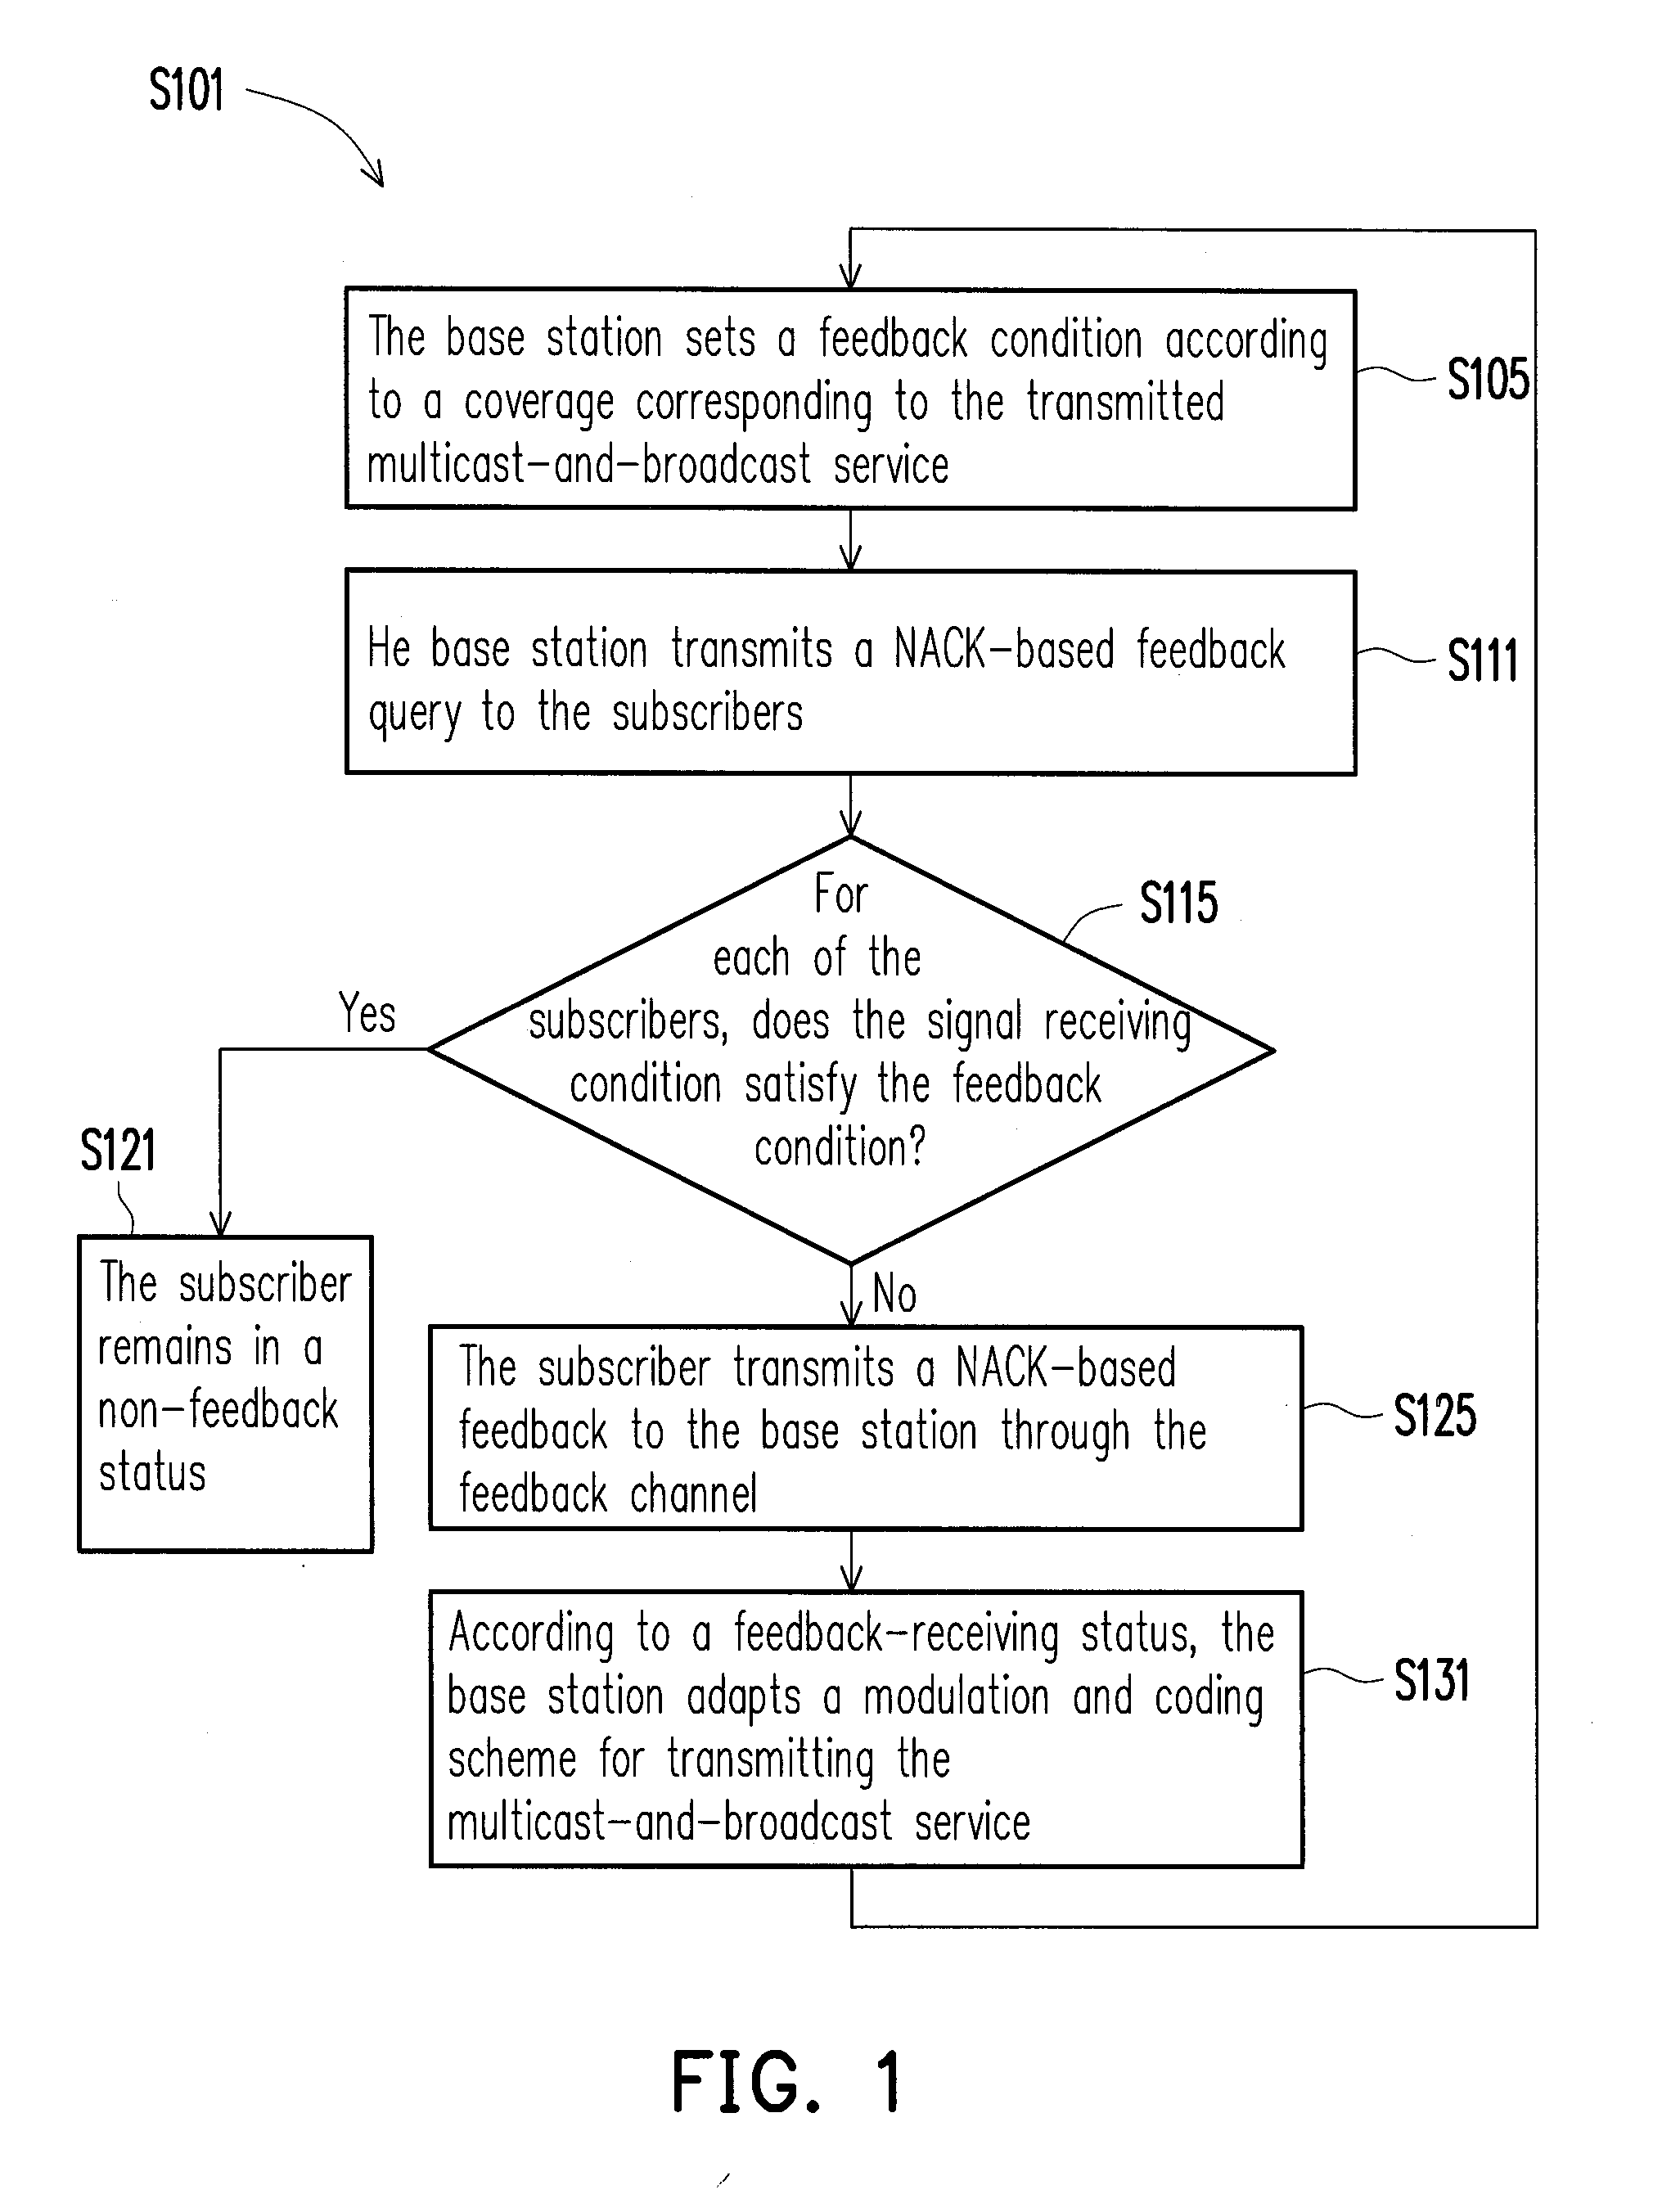 Method and system for dynamically adapting a modulation and coding scheme